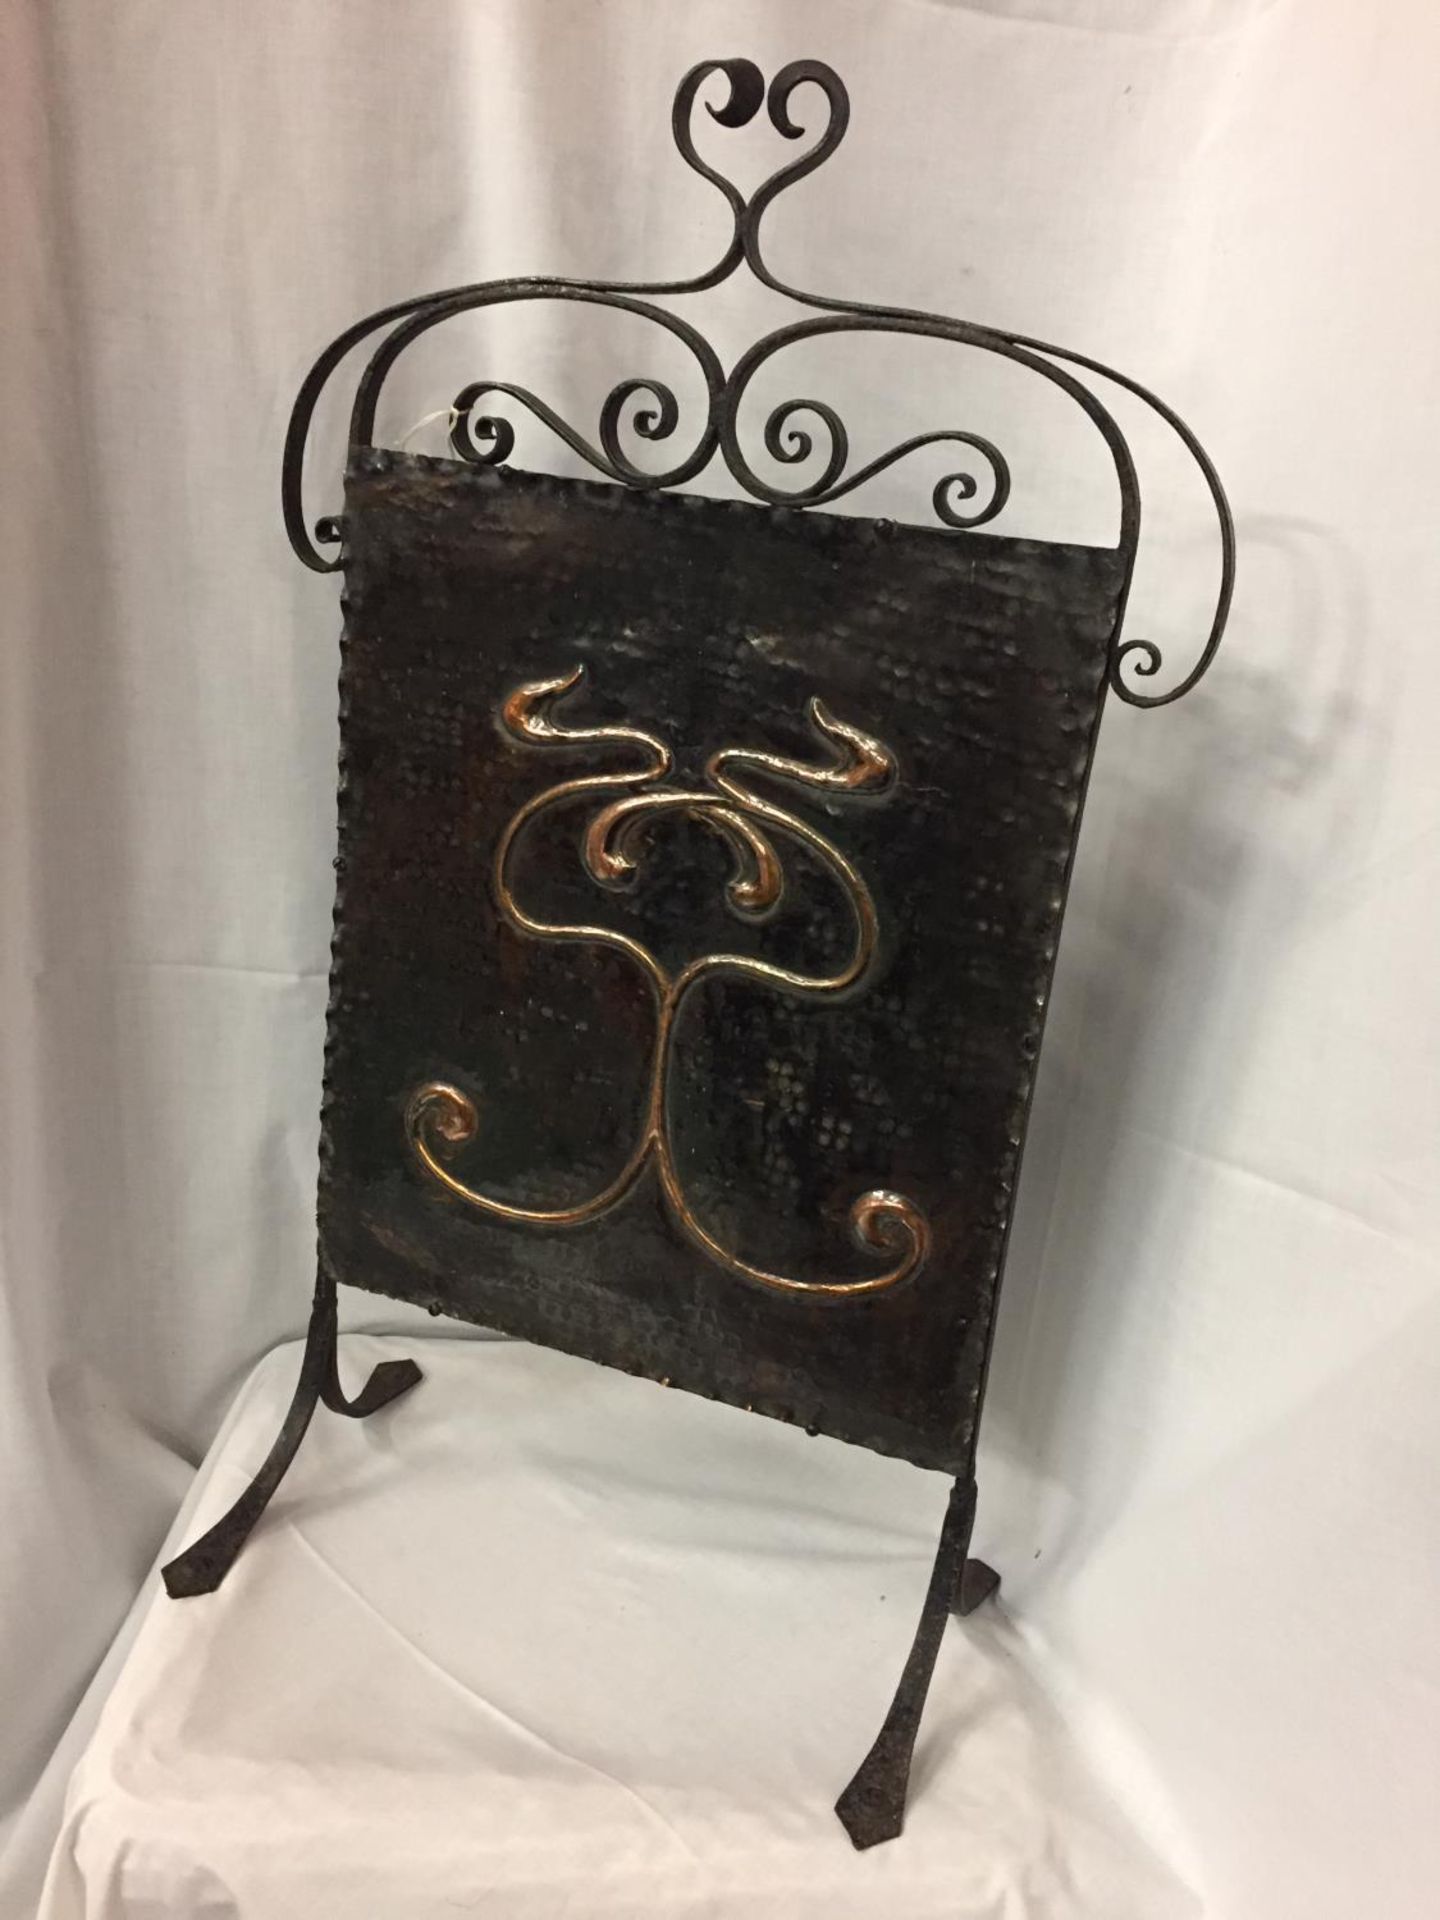 AN ARTS AND CRAFTS FIRE SCREEN WITH A DECORATIVE COPPER PANEL ON A WROUGHT IRON FRAME